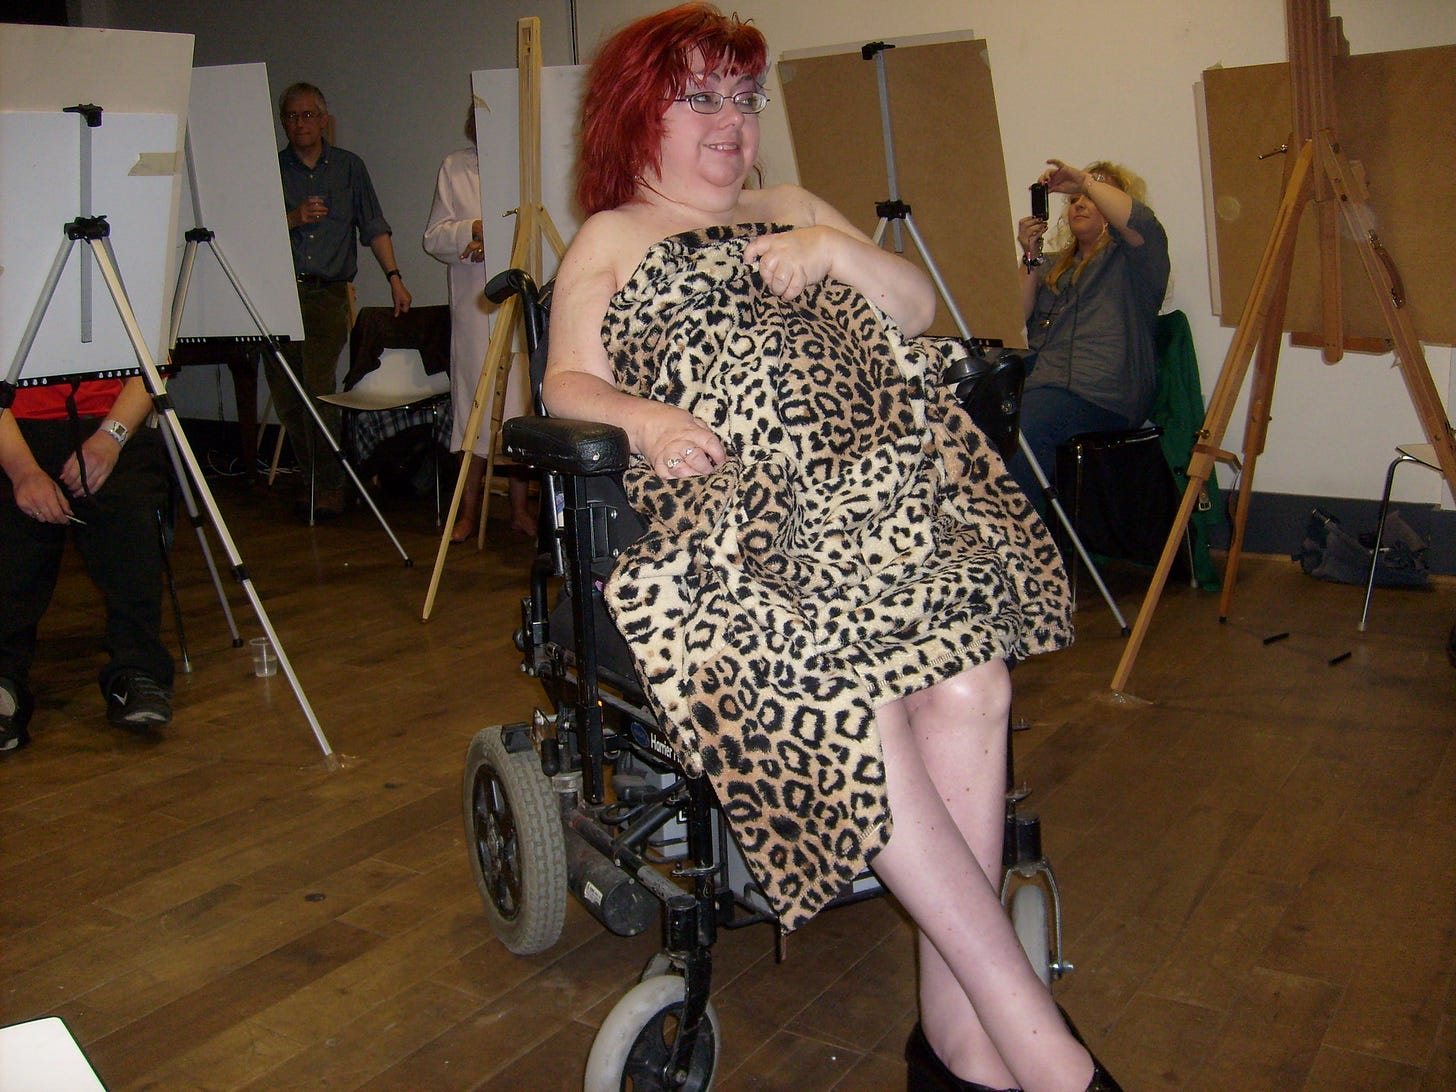 Penny sits in her wheelchair looking to one side. She is holding a loose leopard print fabric over her body, but exposes her legs to the knees and her shoulders are bare. Penny wears liked framed glasses and has deep red hair. She is in a room set up for art students who are busy behind their easels which stand on tripod frames. The scene is quite dark but Penny is smiling at her work as a model.